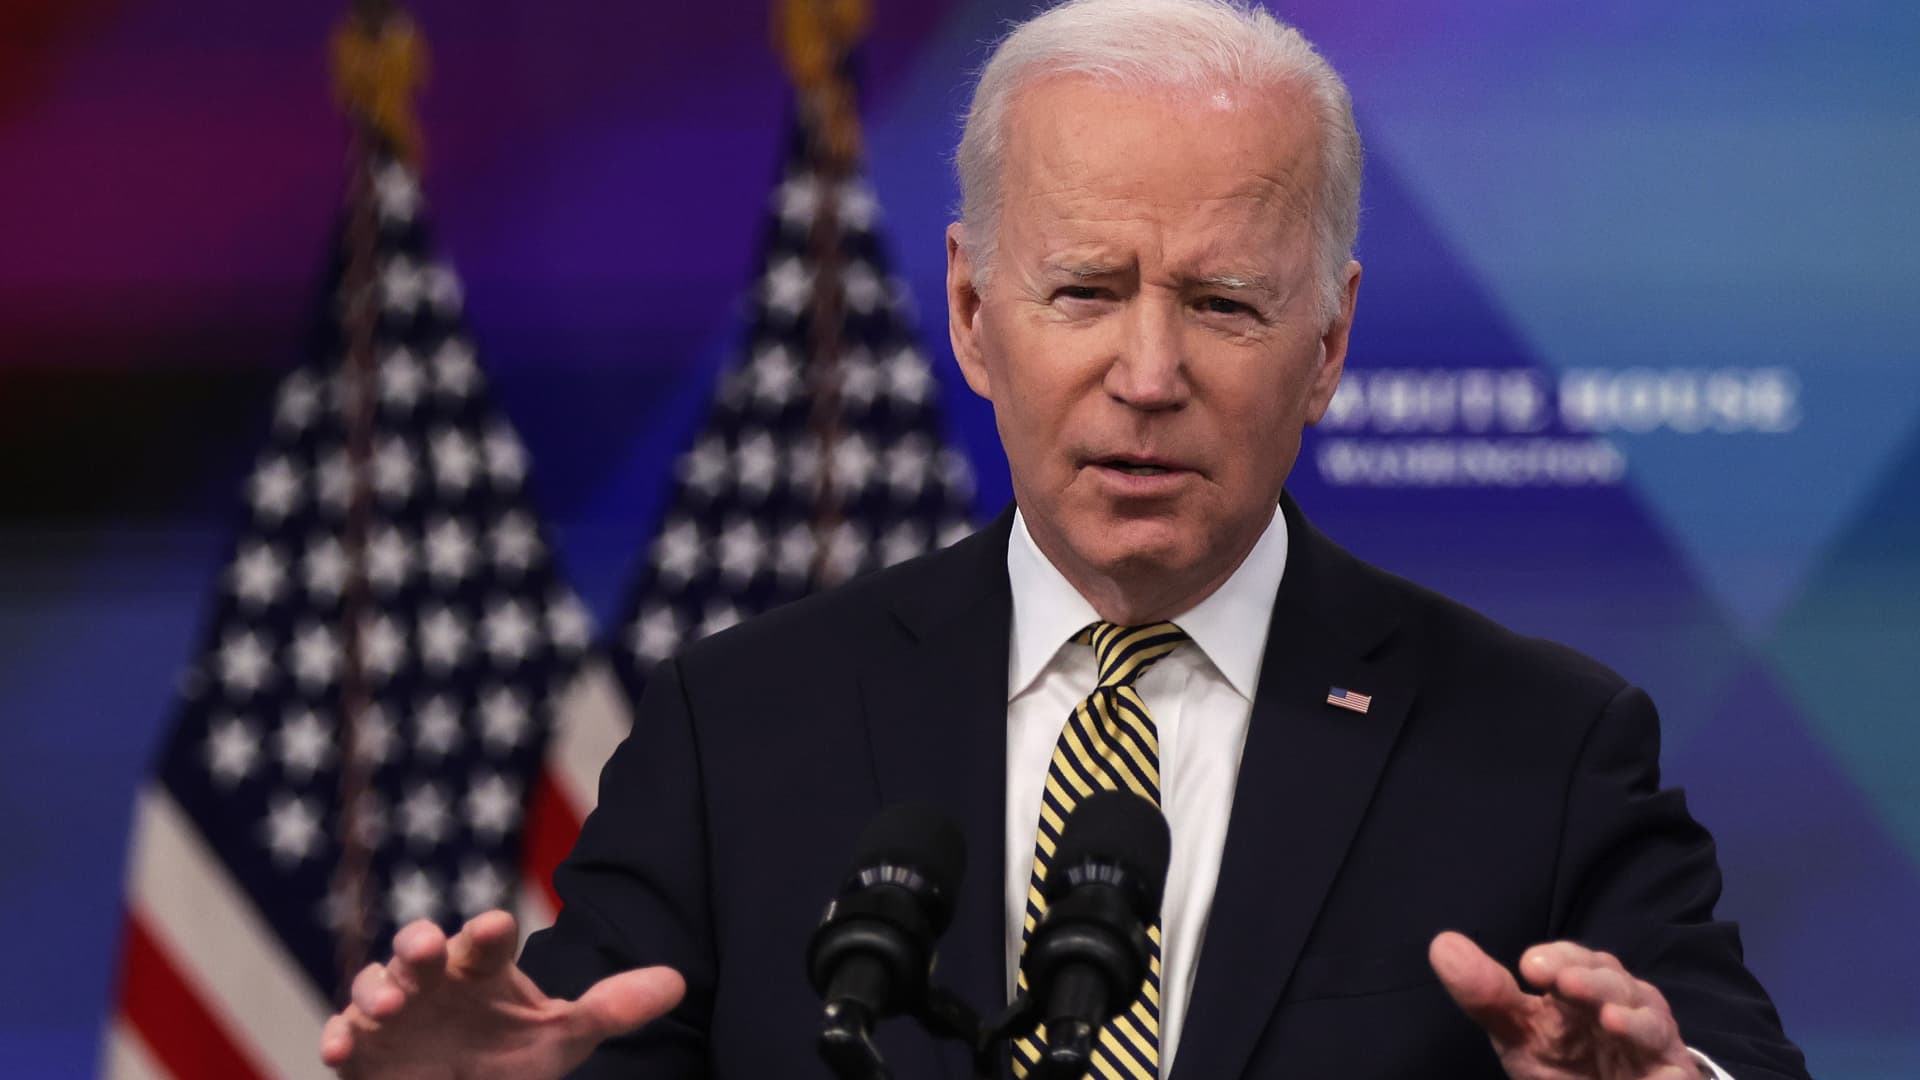 U.S. President Joe Biden speaks on Ukraine during an event in the South Court Auditorium at Eisenhower Executive Office Building near the White House on March 16, 2022 in Washington, DC. President Biden delivered remarks on U.S. assistance to Ukraine.